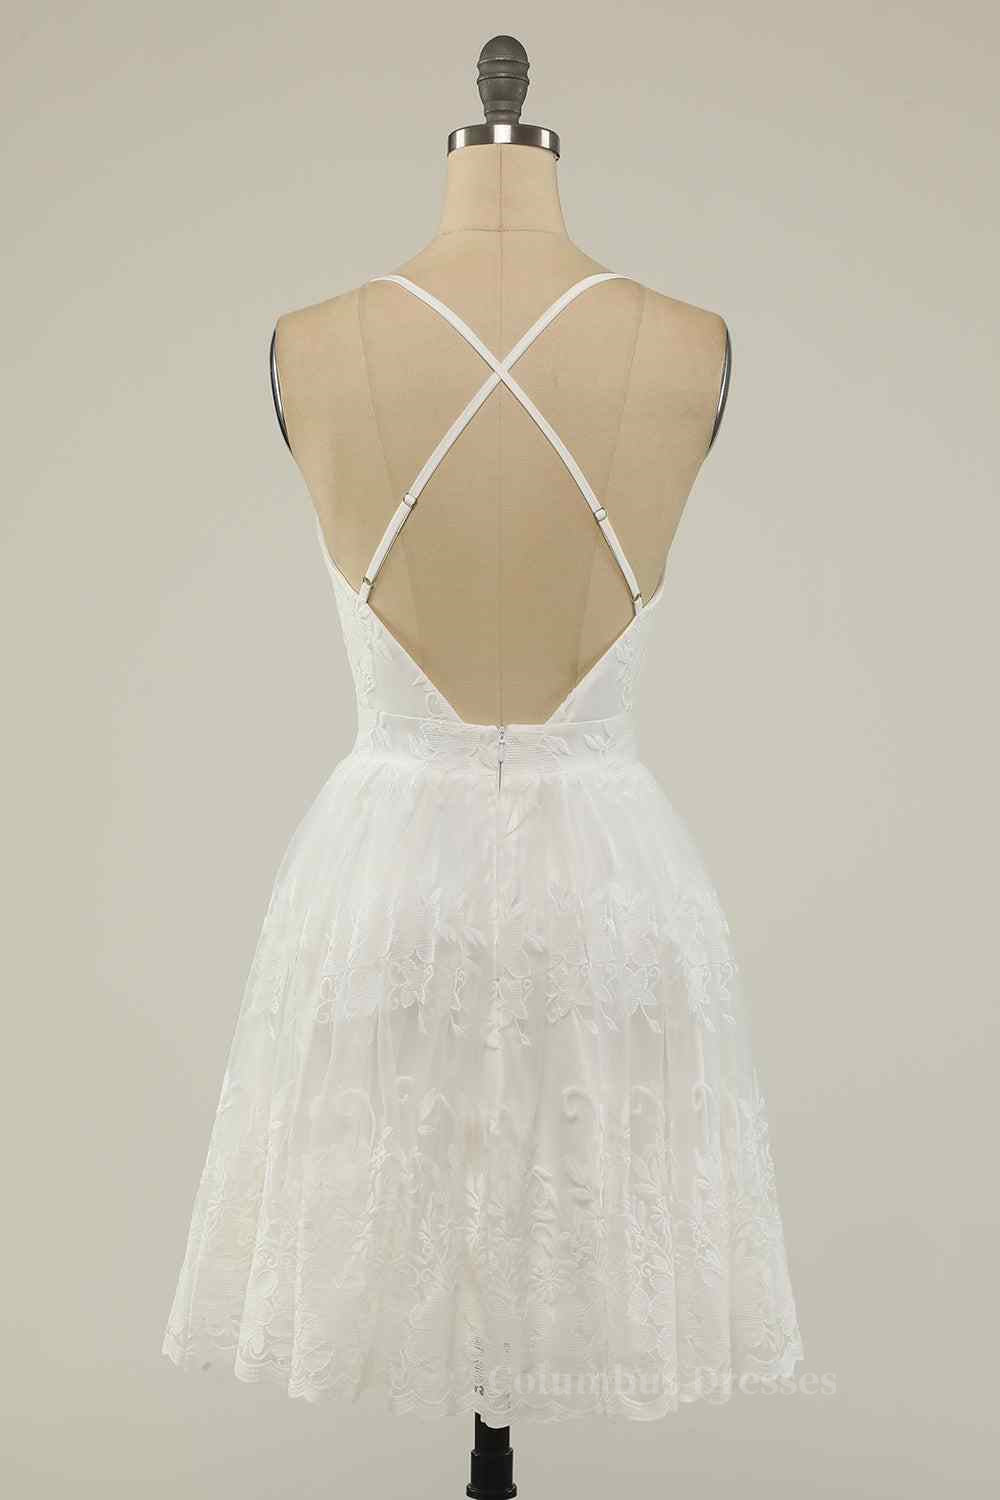 Party Dress Styling Ideas, A-line Deep V Neck Crossed Back Embroidery Mini Homecoming Dress